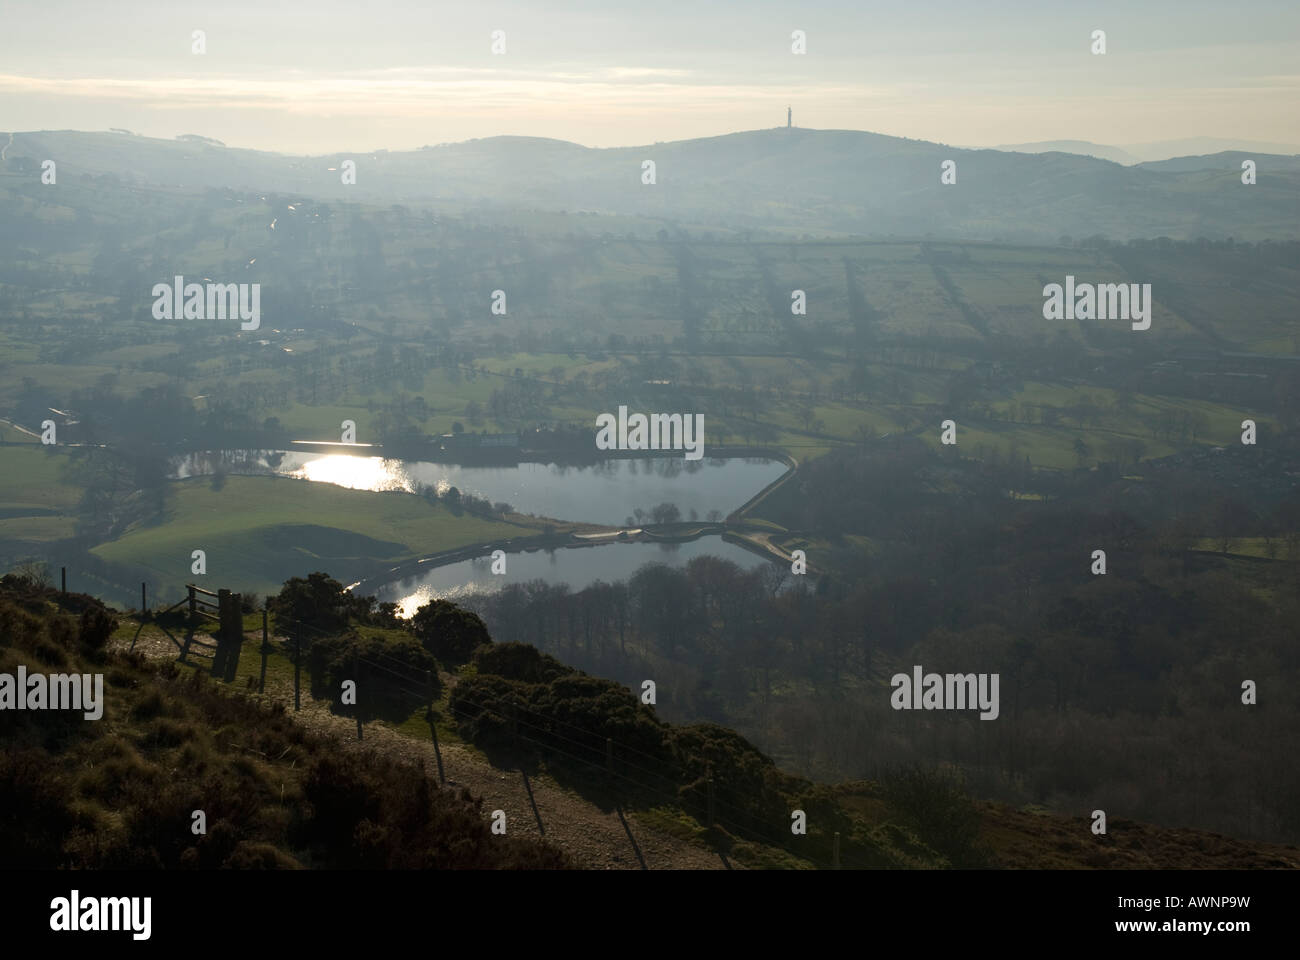 View from Teggs Nose over Teggs Nose Reservoir and Bottoms Reservoir, Macclesfield Forest, with radio mast on hill in distance Stock Photo